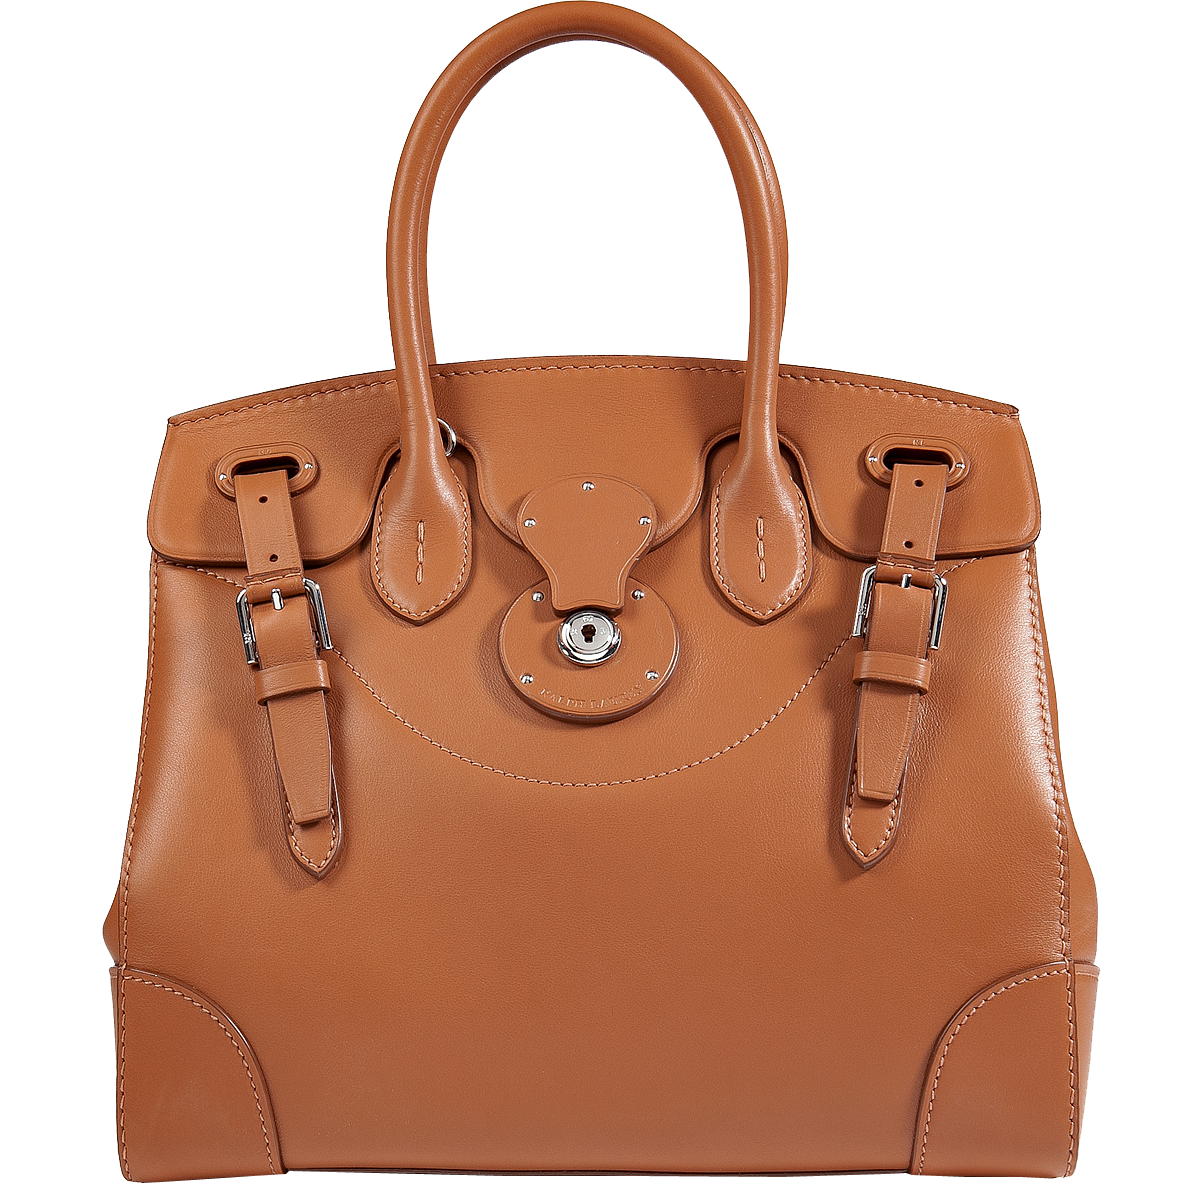 Ralph Lauren Collection Leather Soft Ricky Tote in Gold